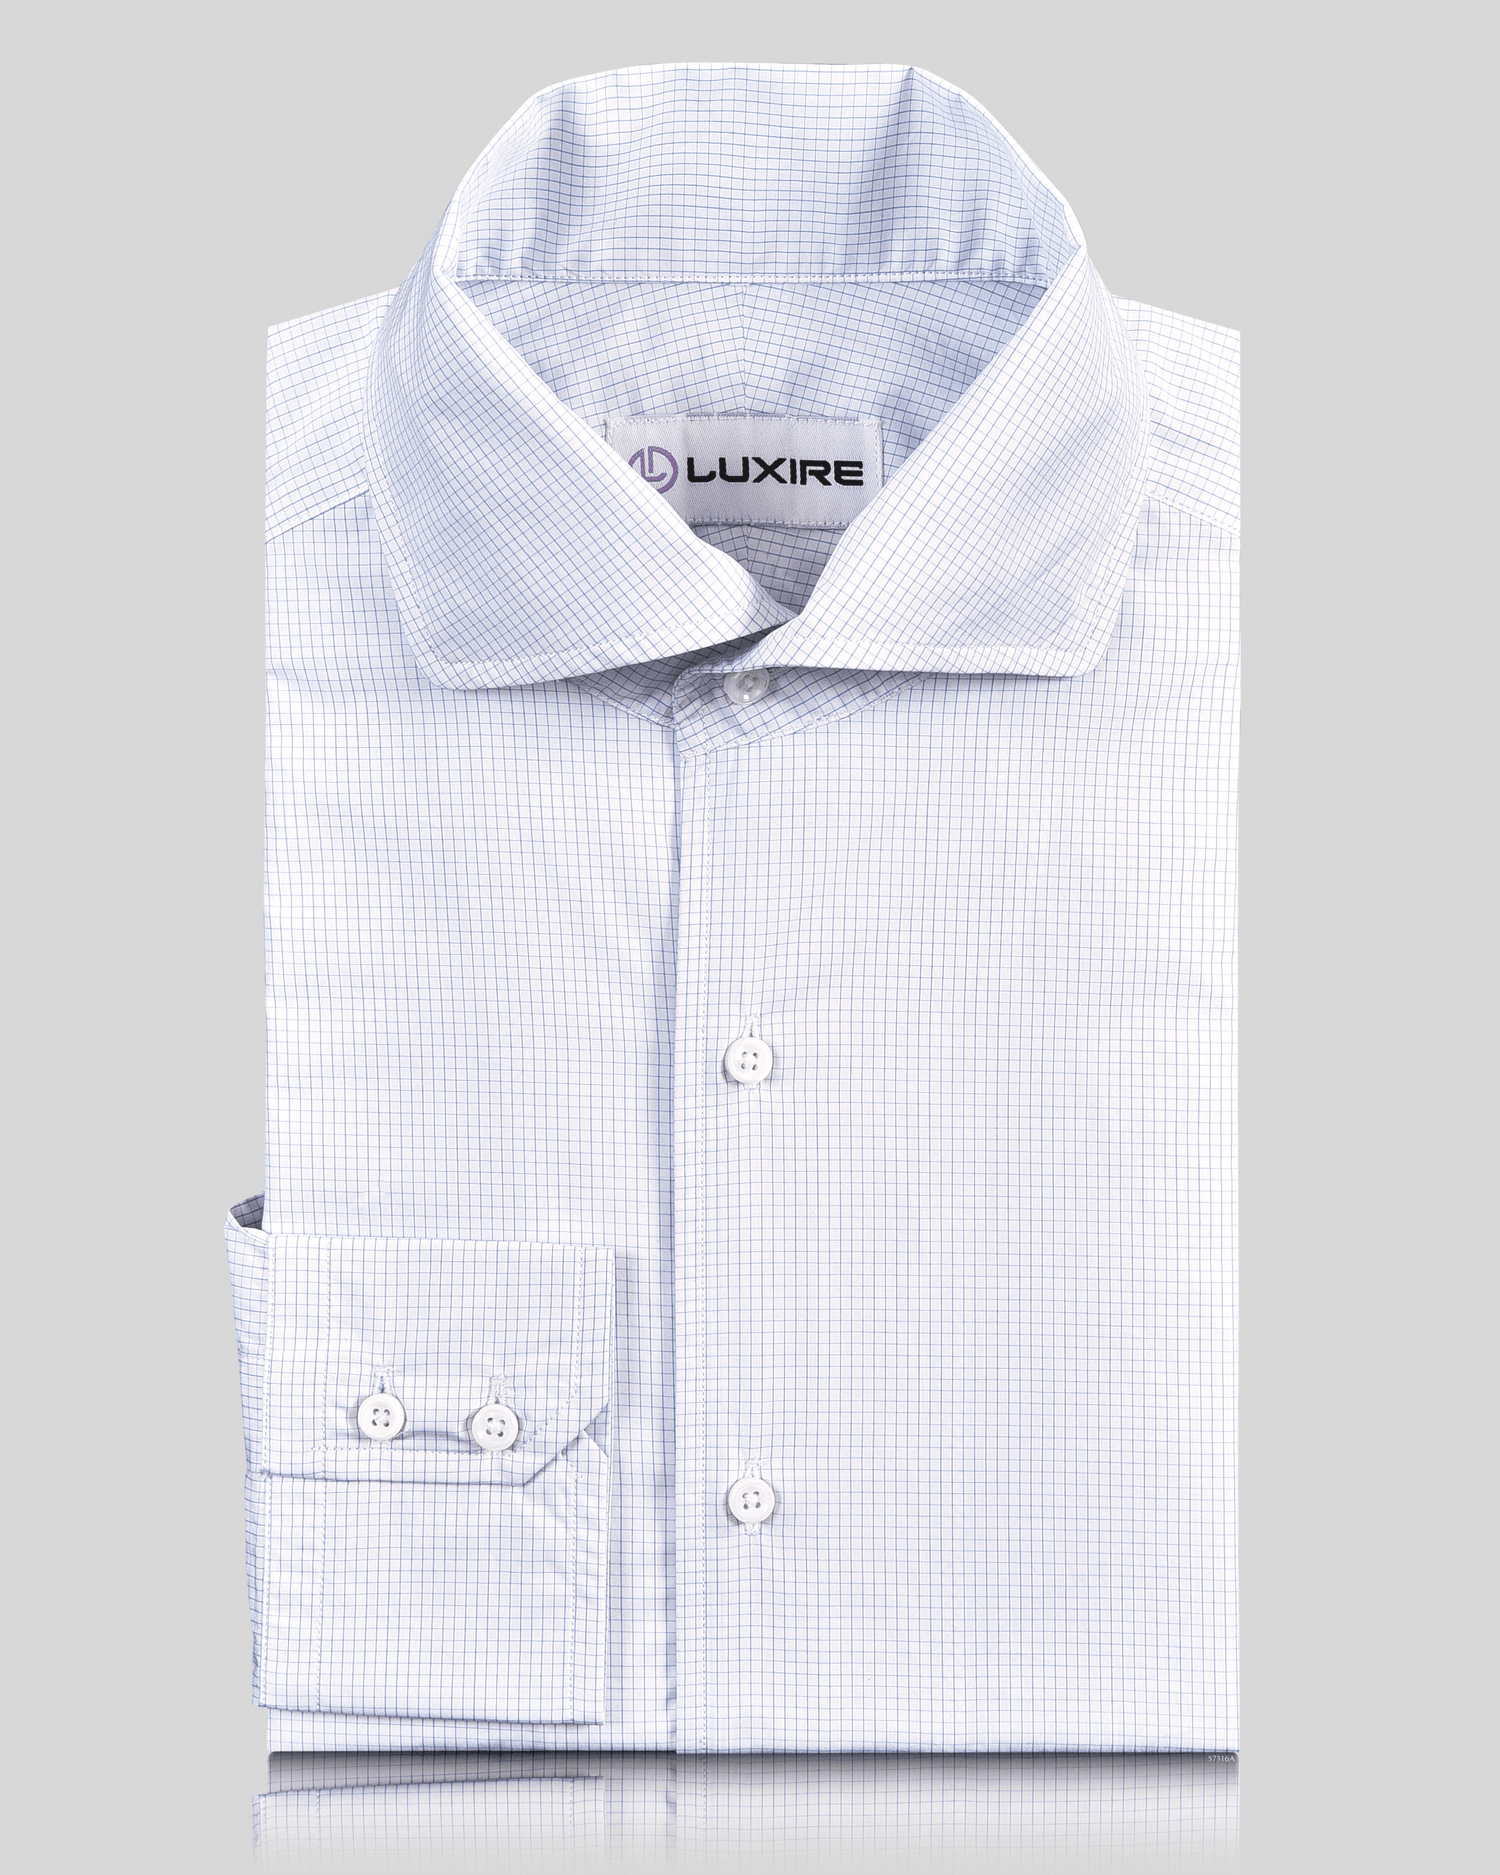 Front view of custom check shirts for men by Luxire brembana white and blue